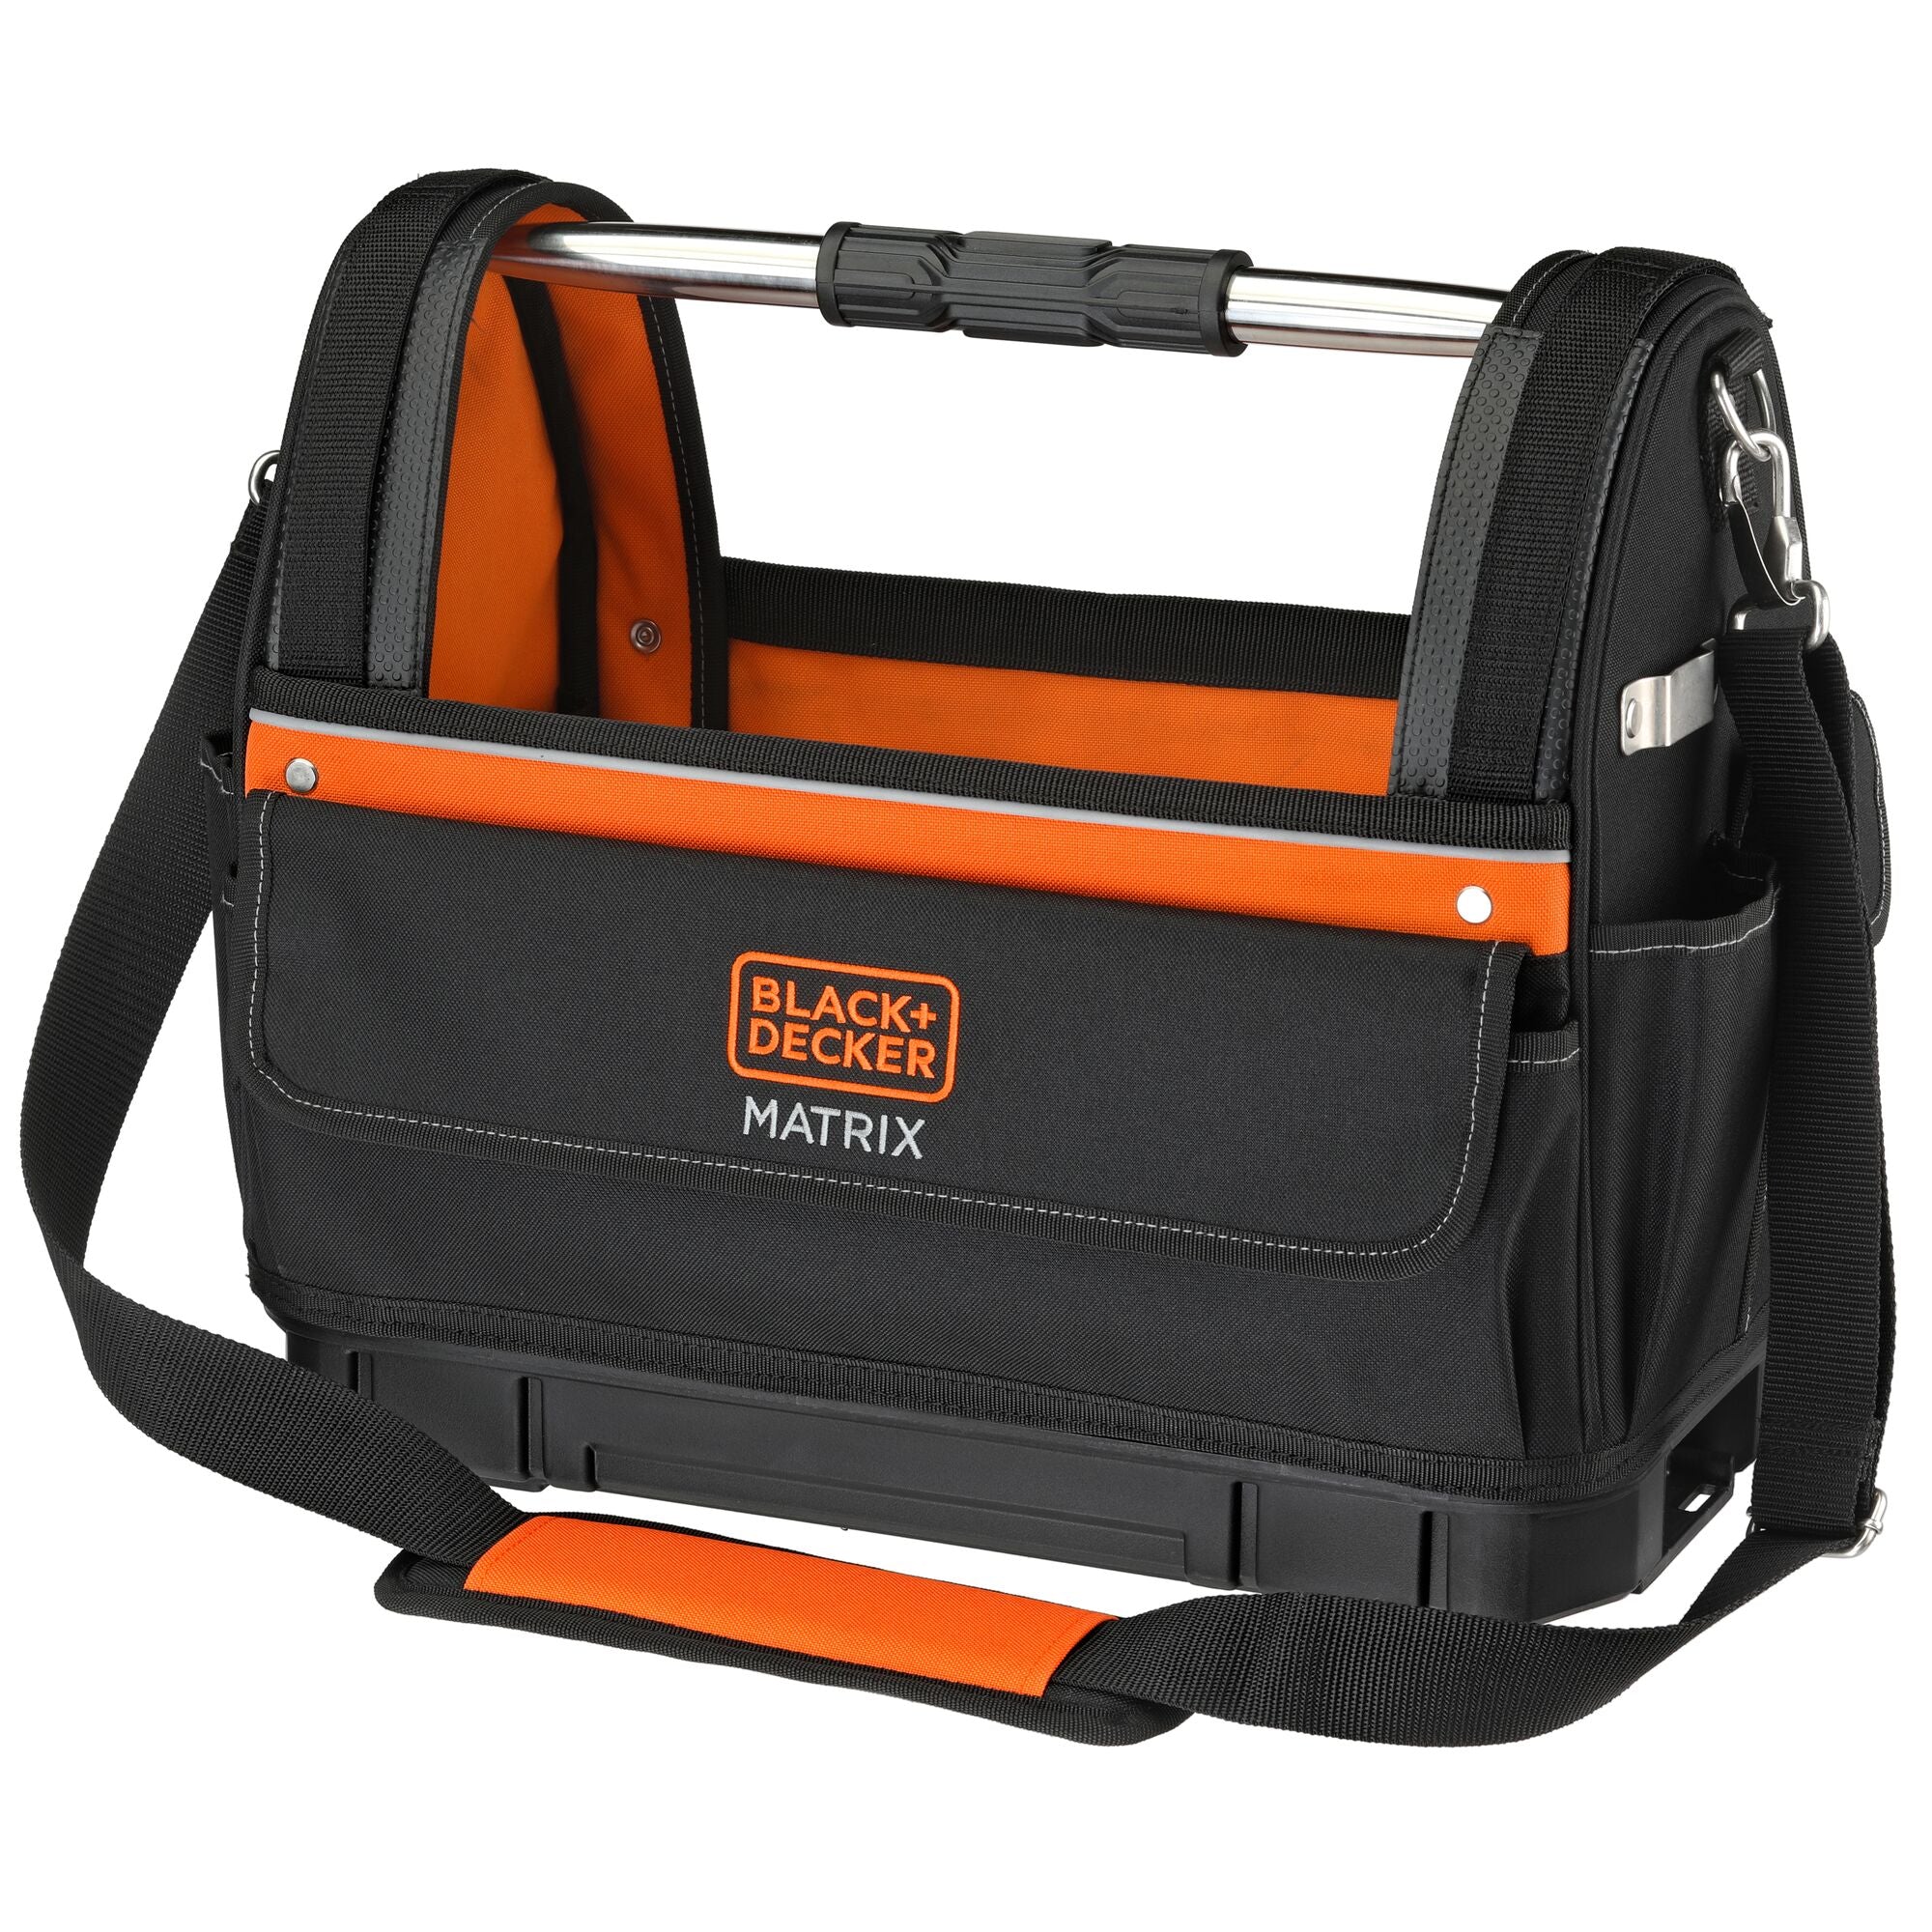  BLACK+DECKER Tool Tote Bag for Matrix System, Wide-Mouth,  21-Inch (BDCMTSB) : Everything Else